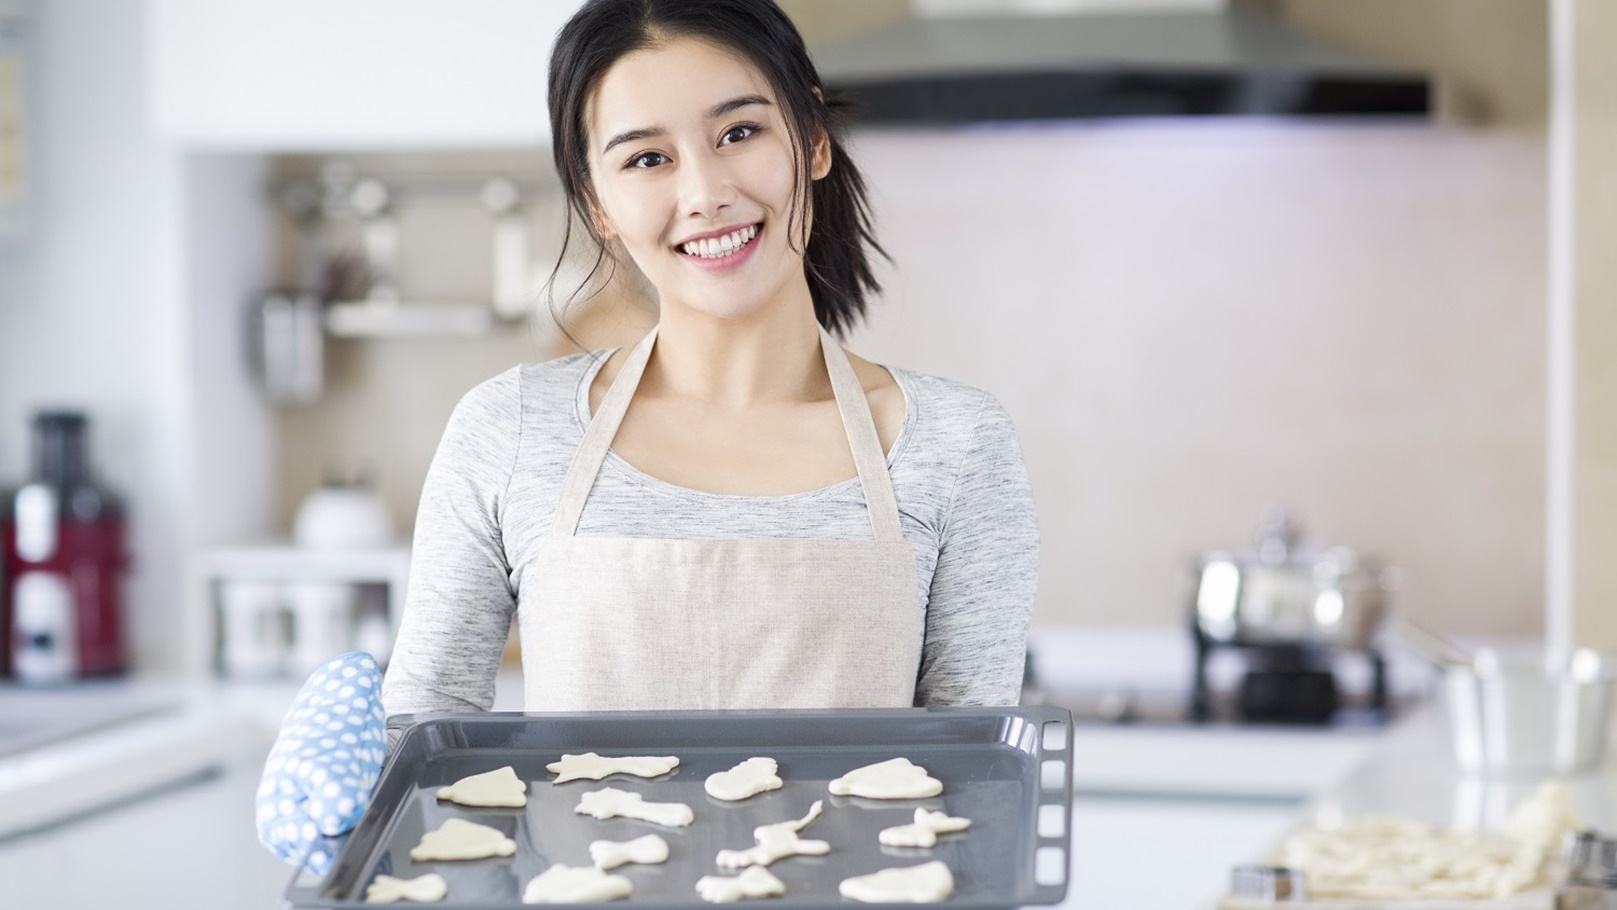 young-woman-making-cookies-in-kitchen-2022-03-25-01-00-24-utc